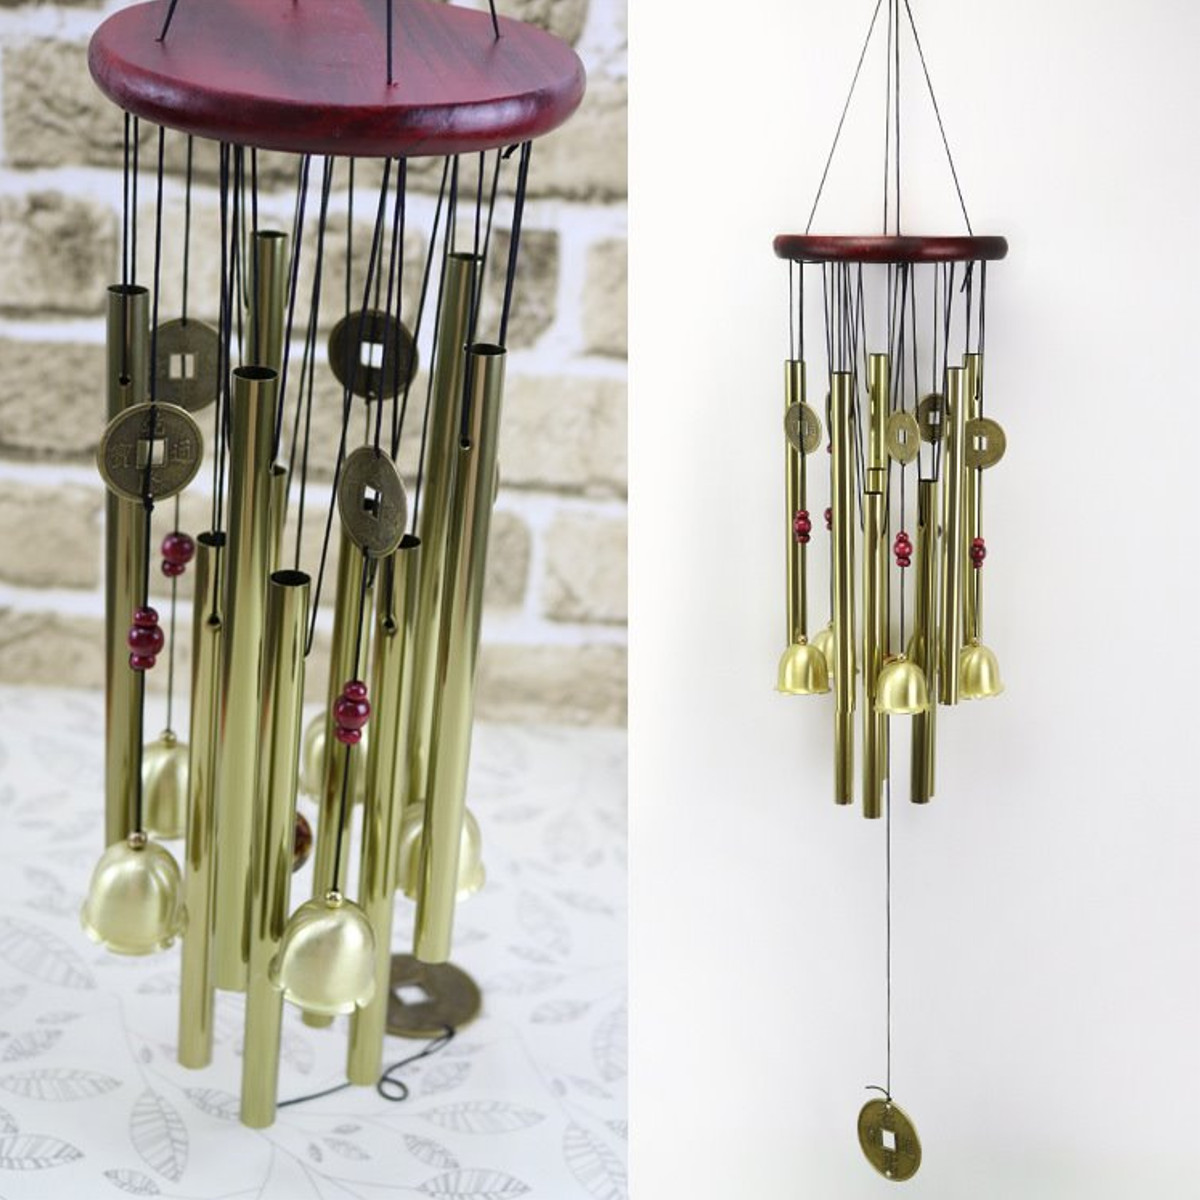 Wind-Chimes-Large-Tone-Resonant-Bell-10-Tubes-Chapel-Church-Garden-Decor-33quot-1694339-4